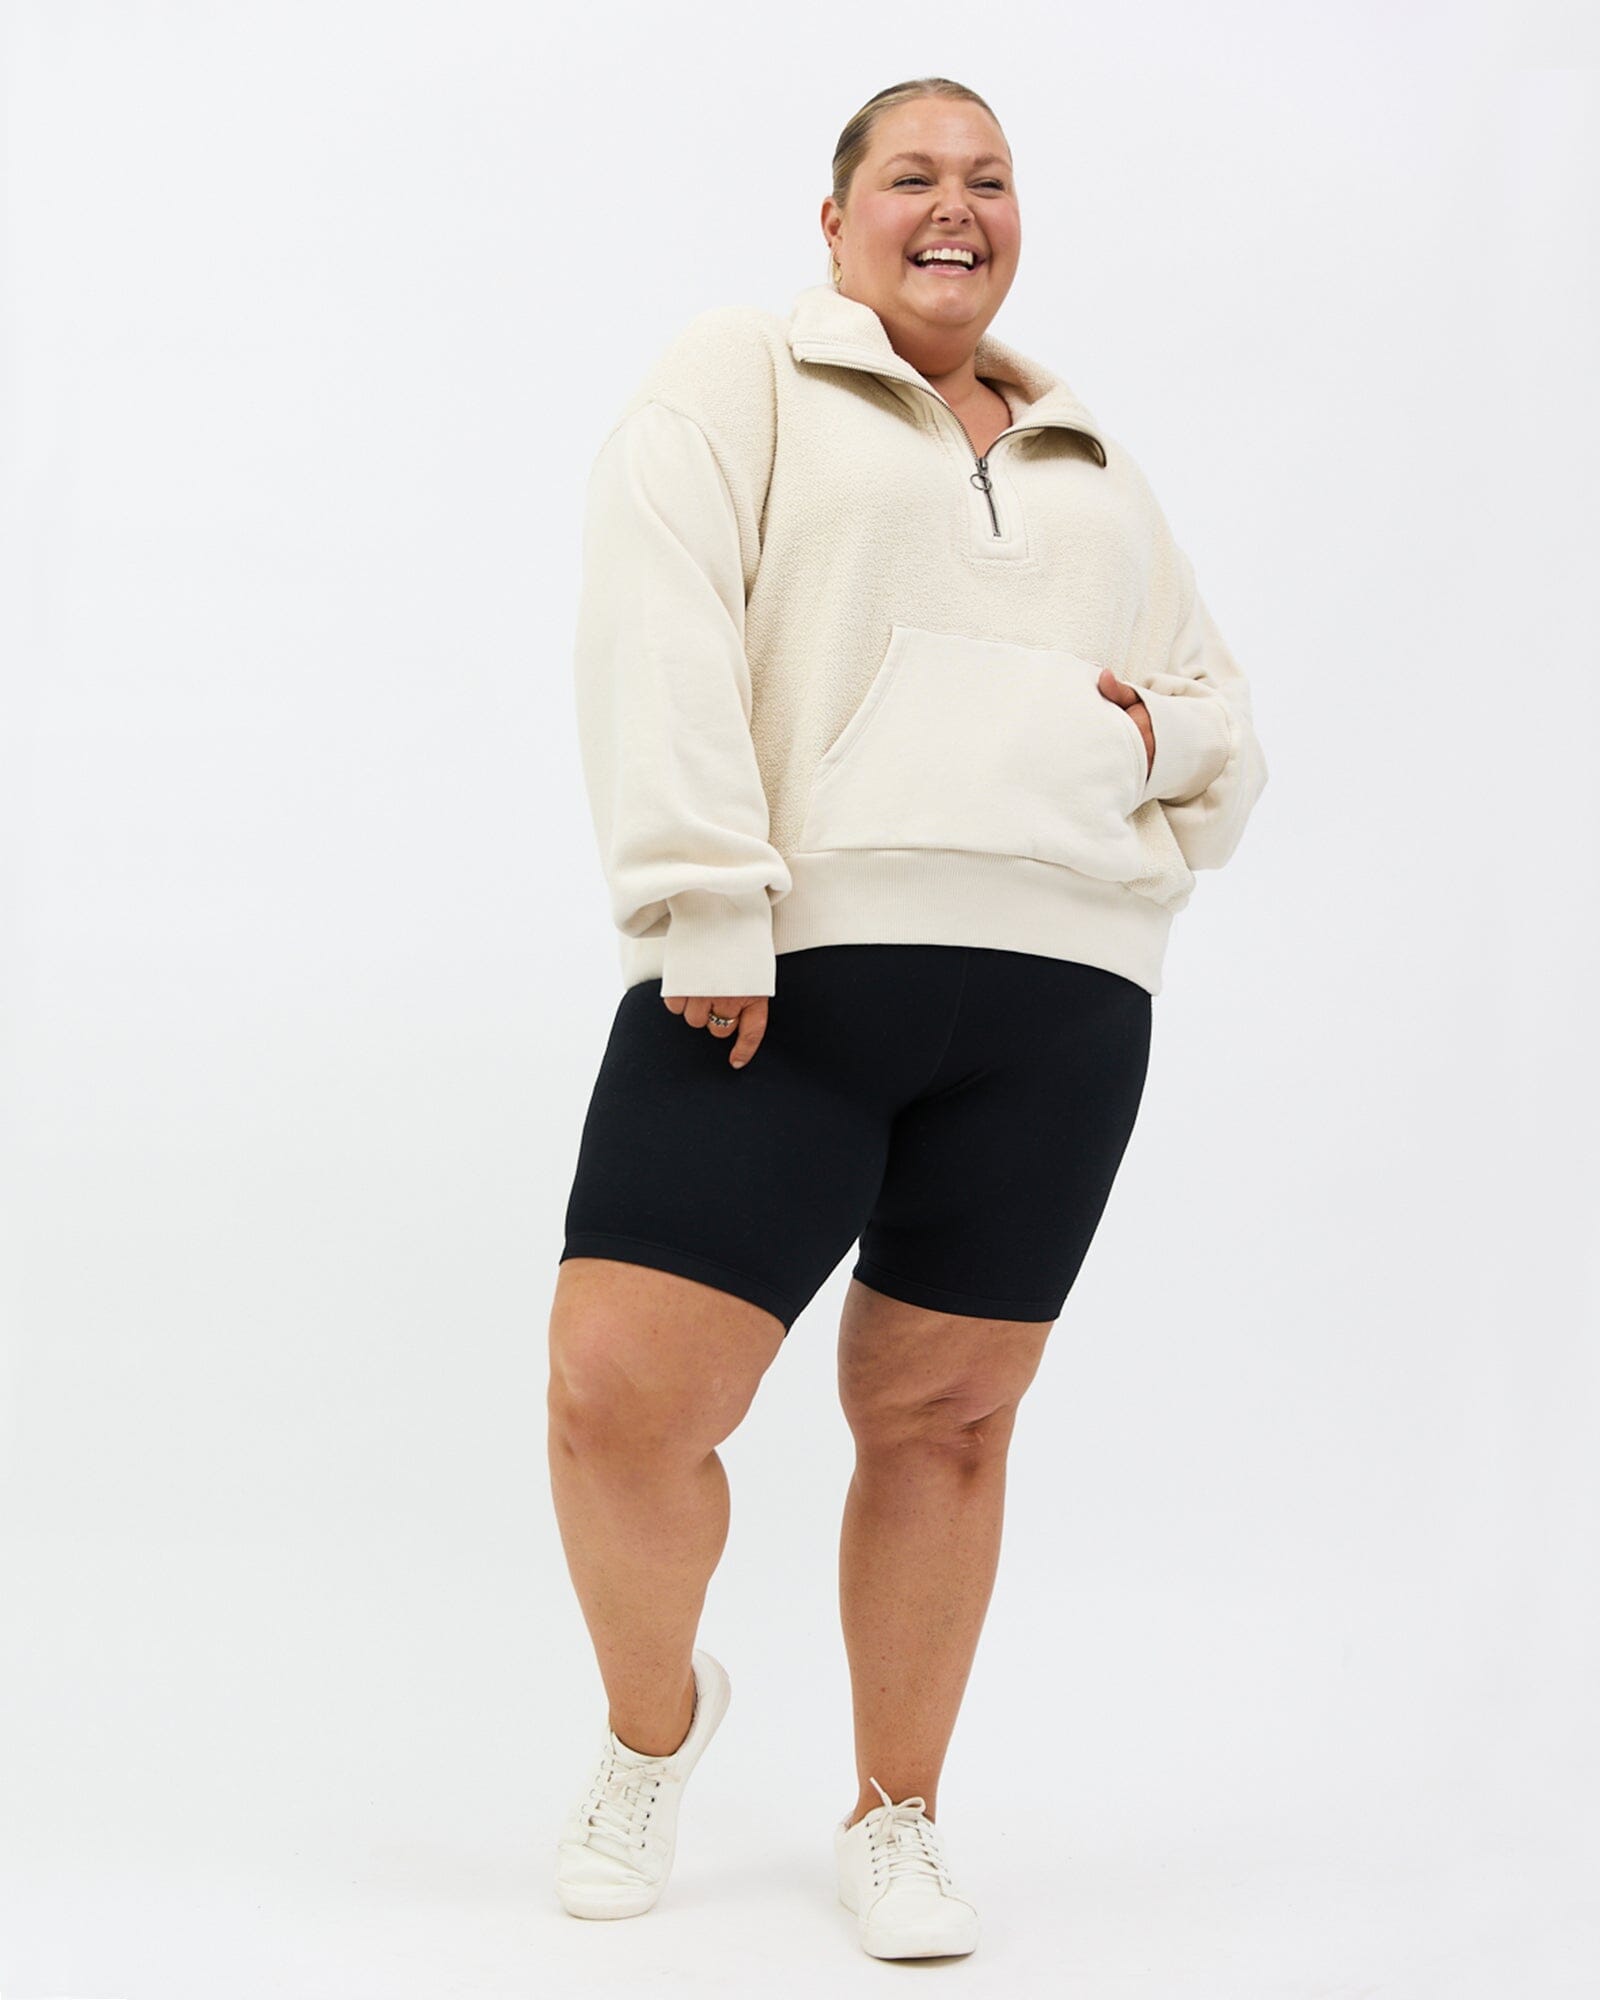 Ultimate Comfy Shorts Pullover Avila the label 